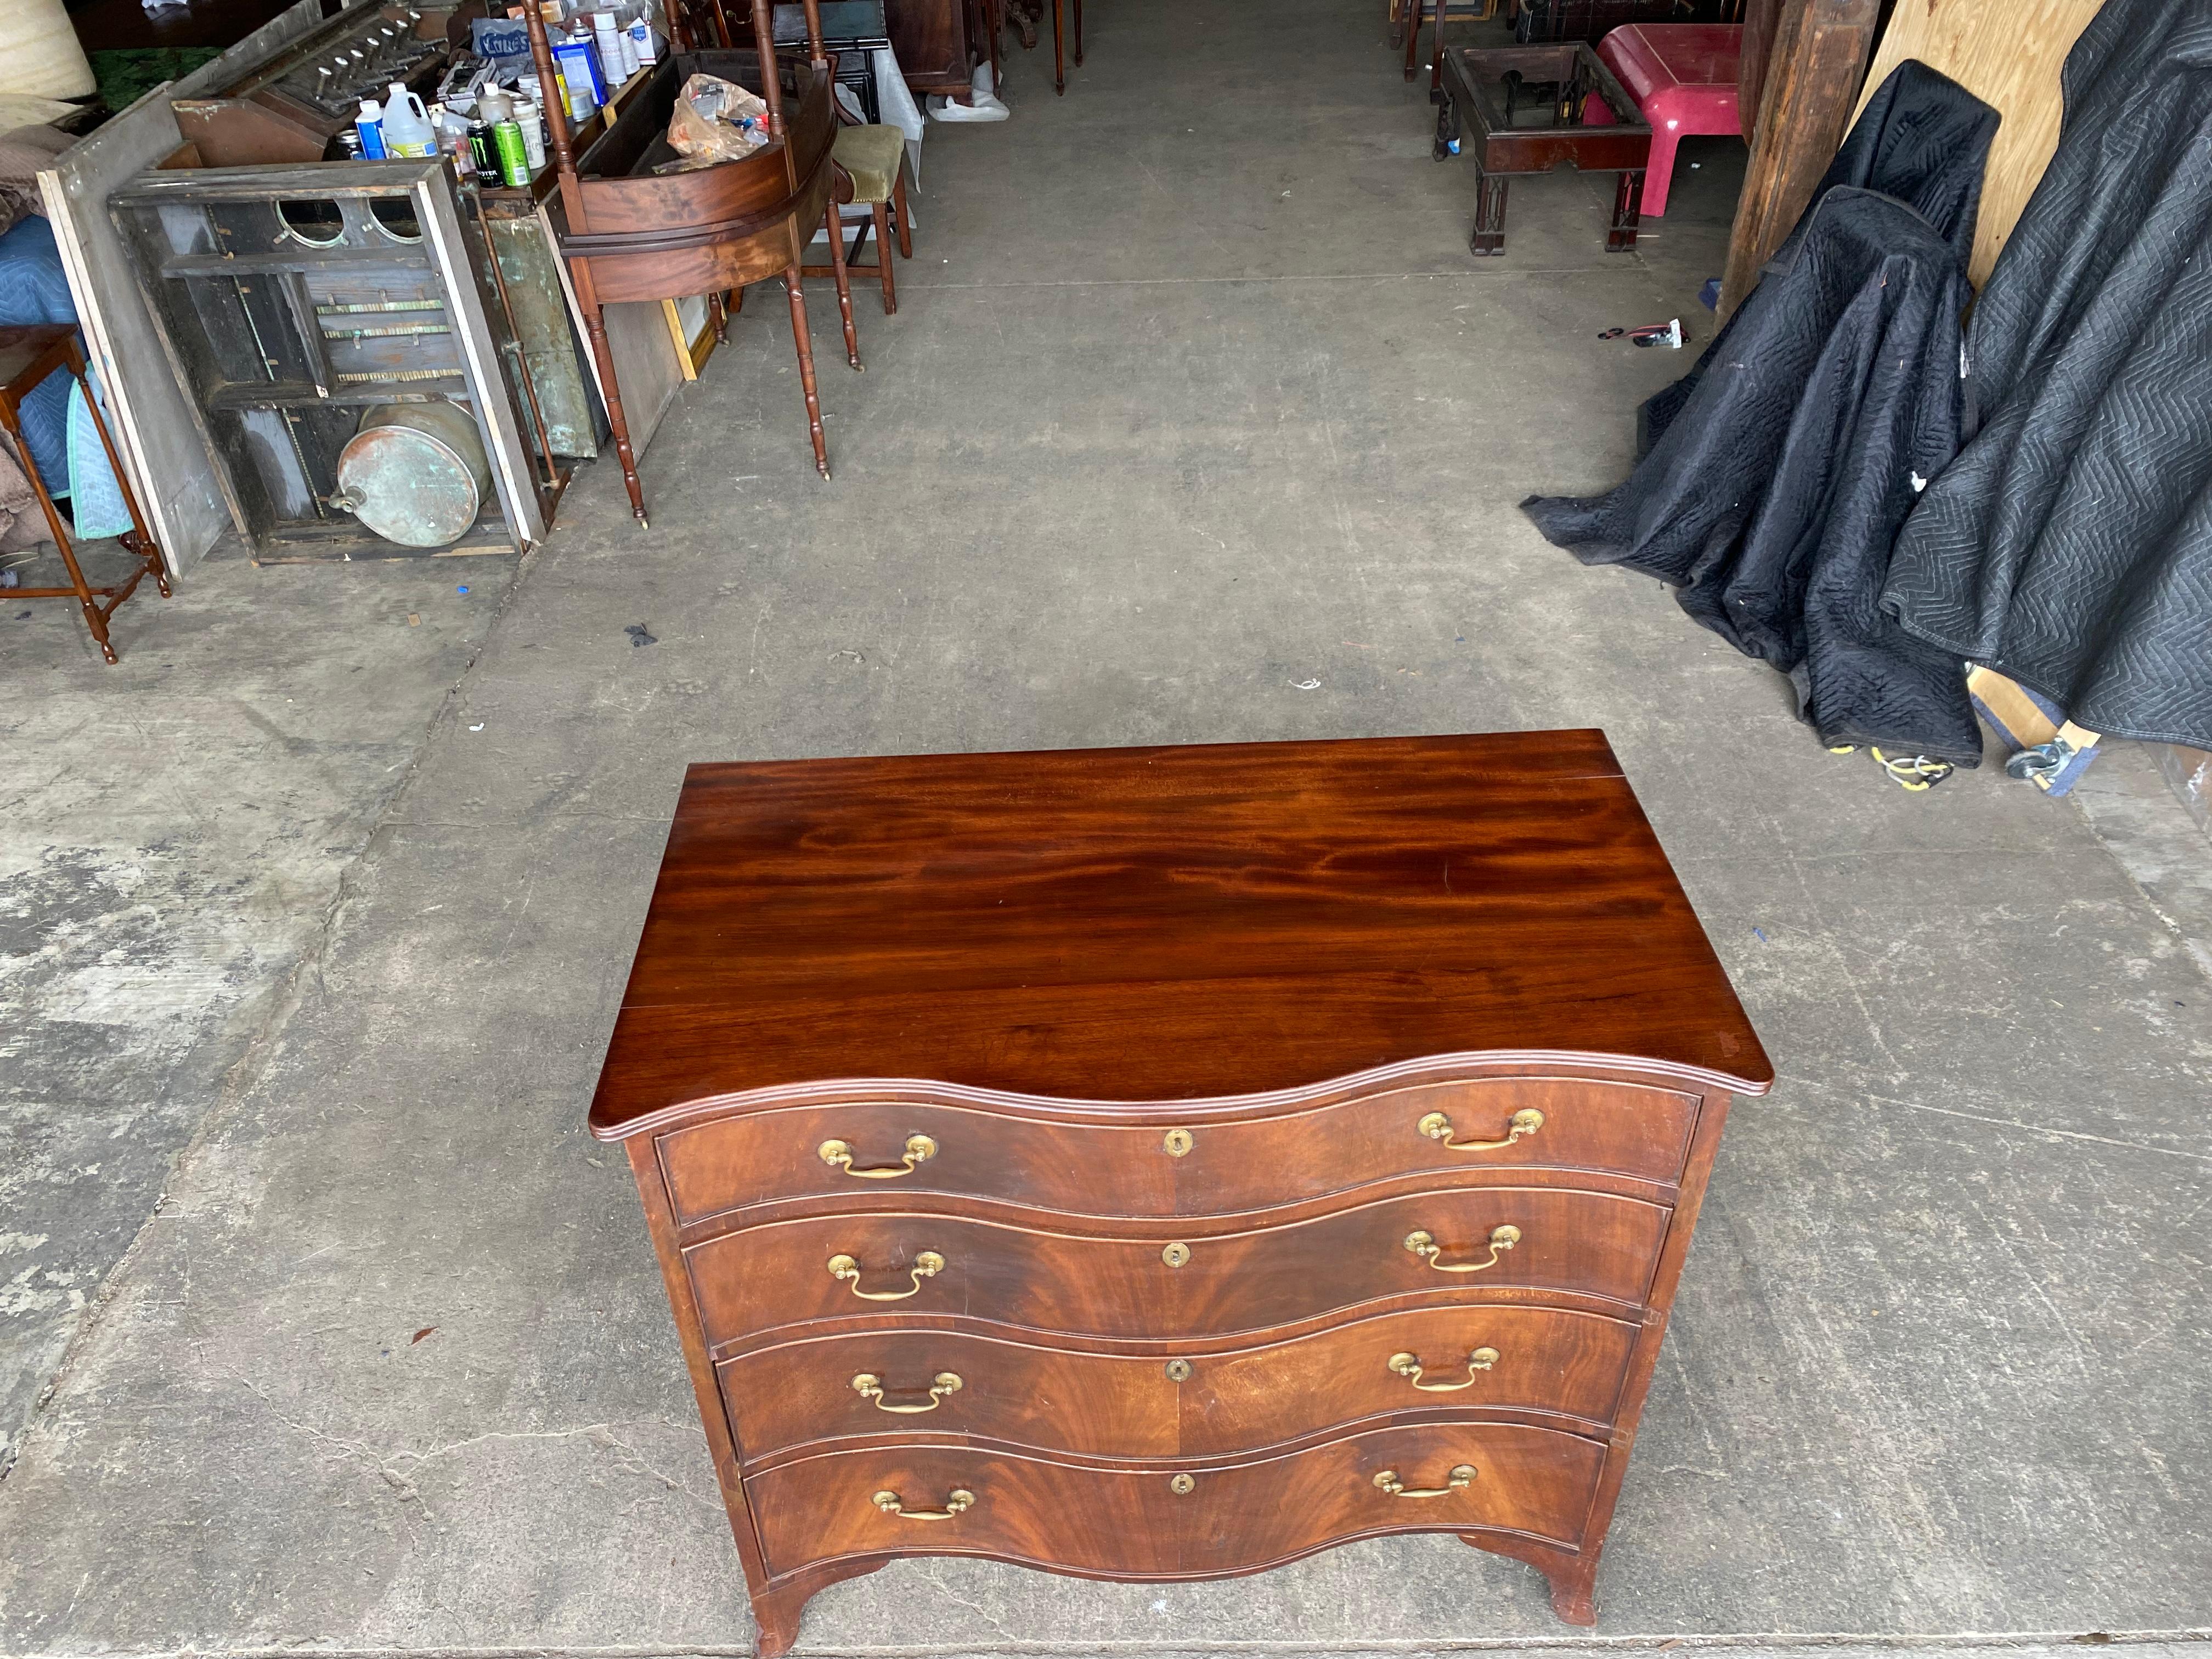 Early 19th century English mahogany serpentine chest on French feet. Wonderful grain, great scale.